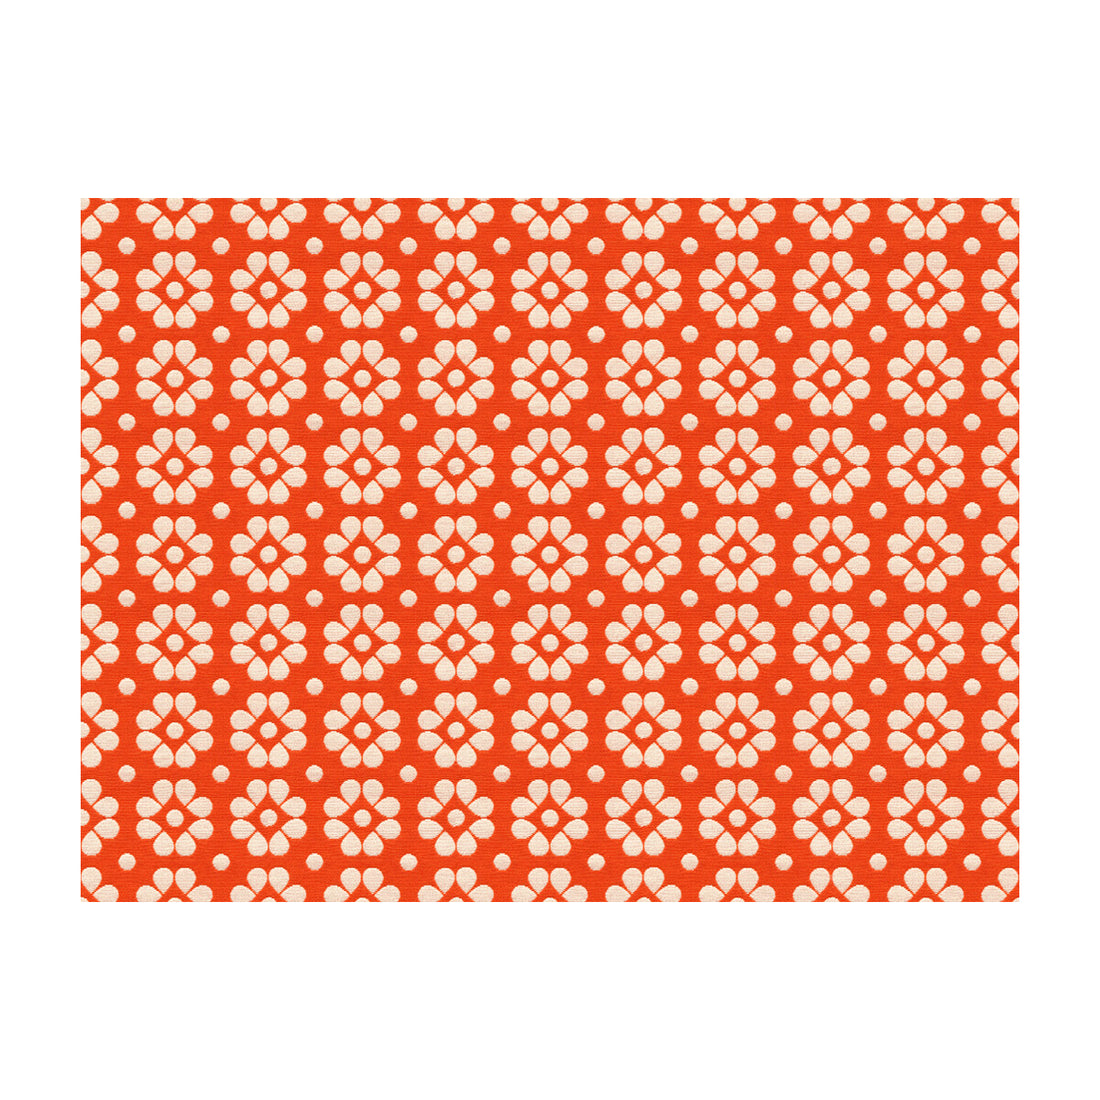 Kahlo fabric in mandarin color - pattern 33780.12.0 - by Kravet Design in the Jonathan Adler Charade collection